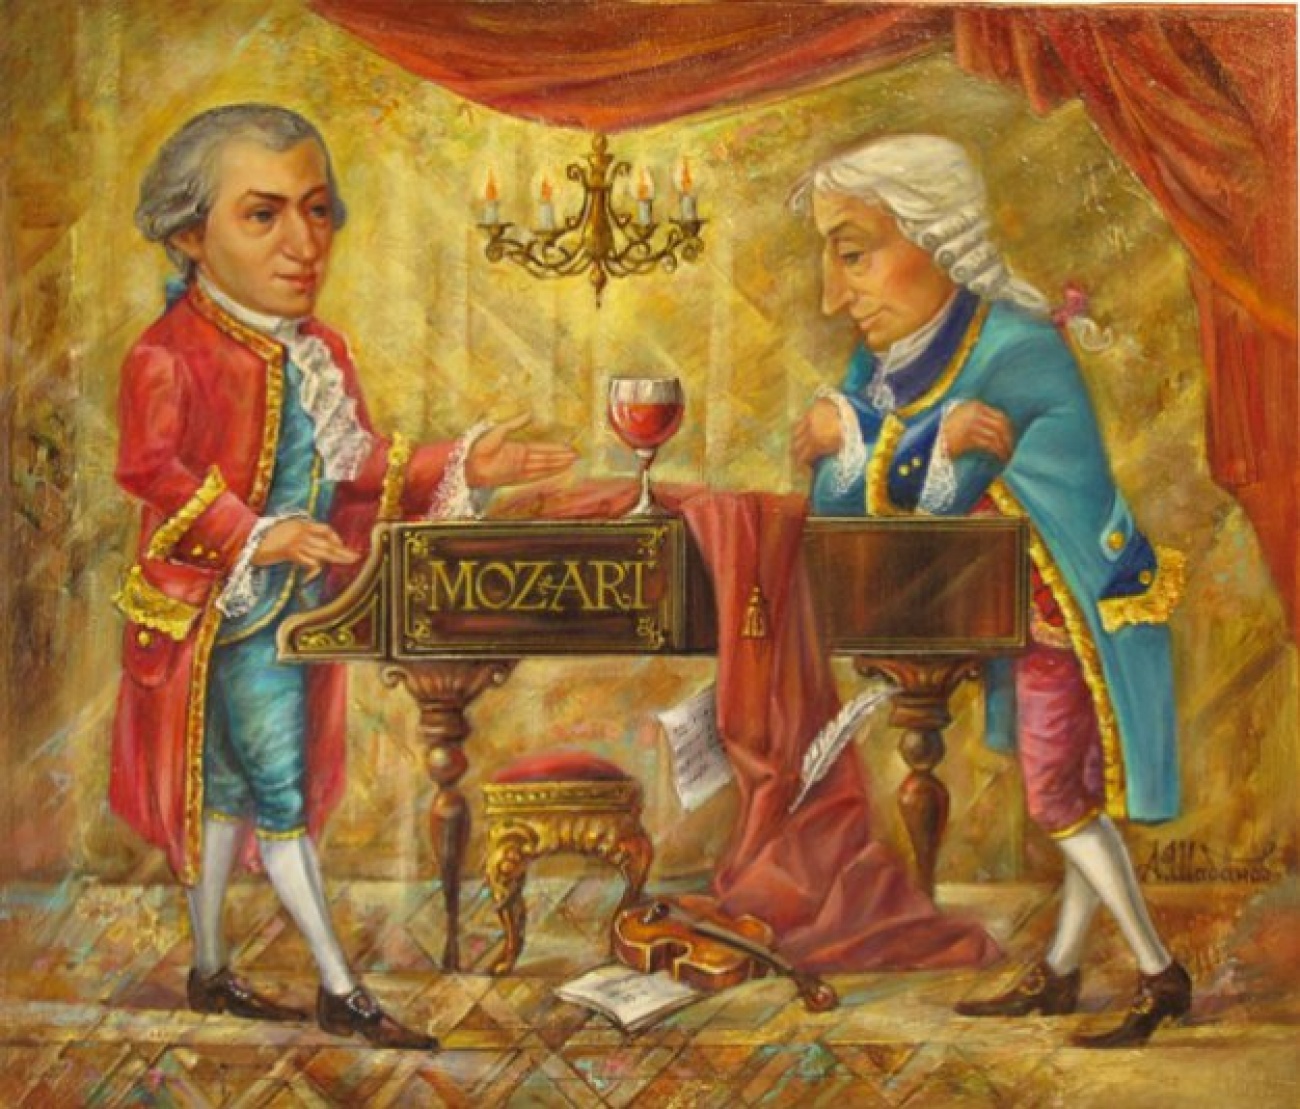 MOZART AND GALLERY Холст, мас...